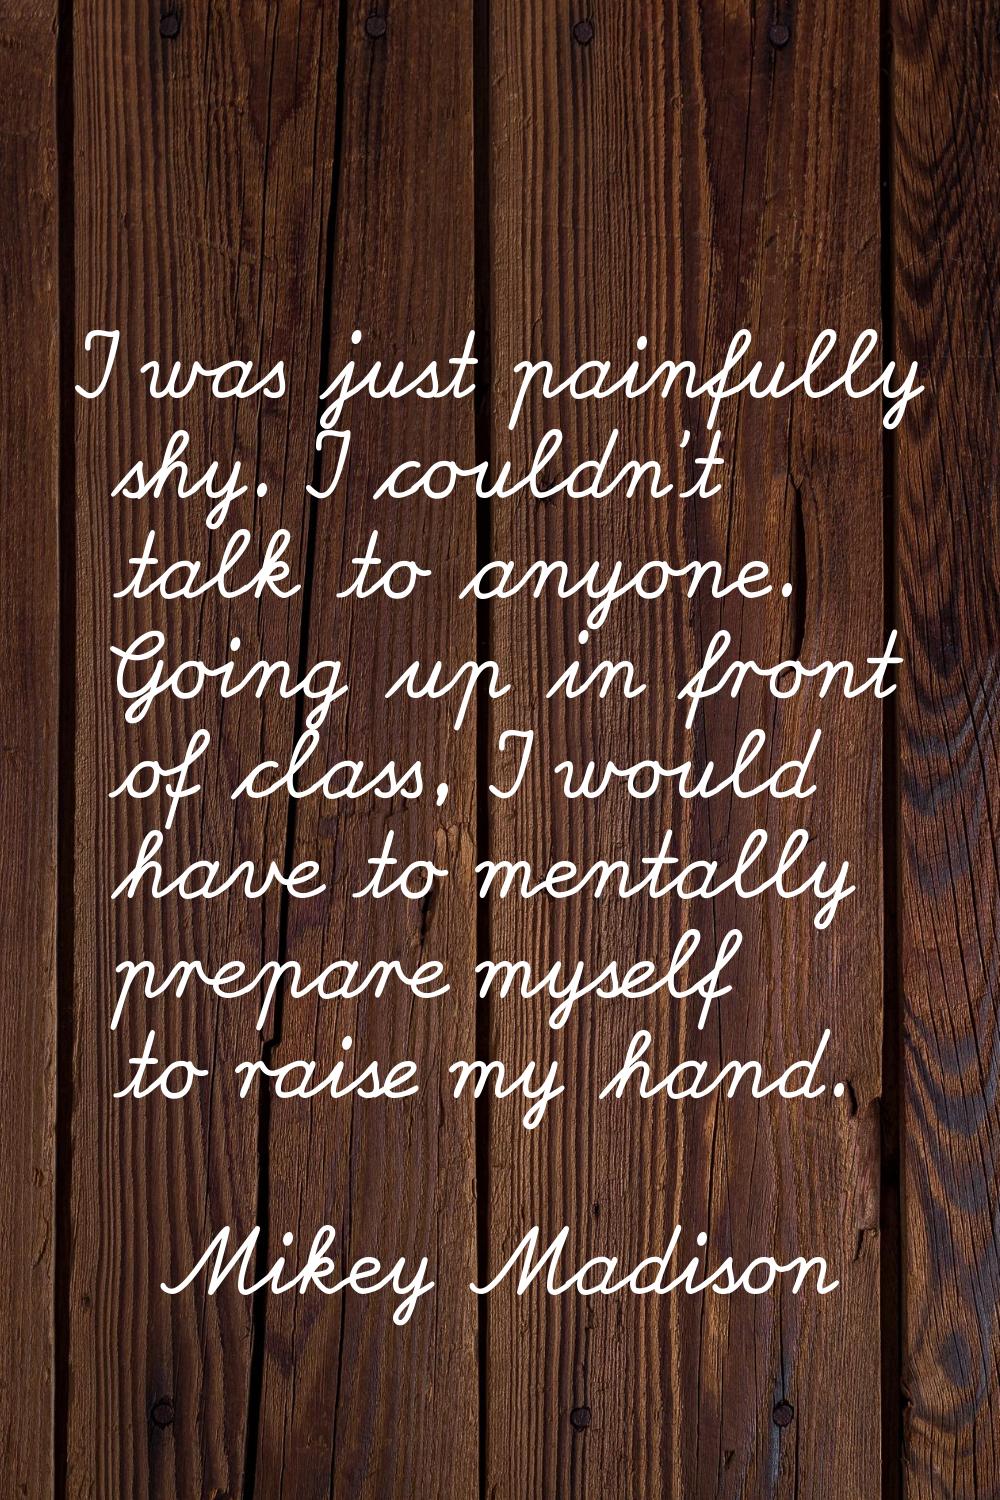 I was just painfully shy. I couldn't talk to anyone. Going up in front of class, I would have to me